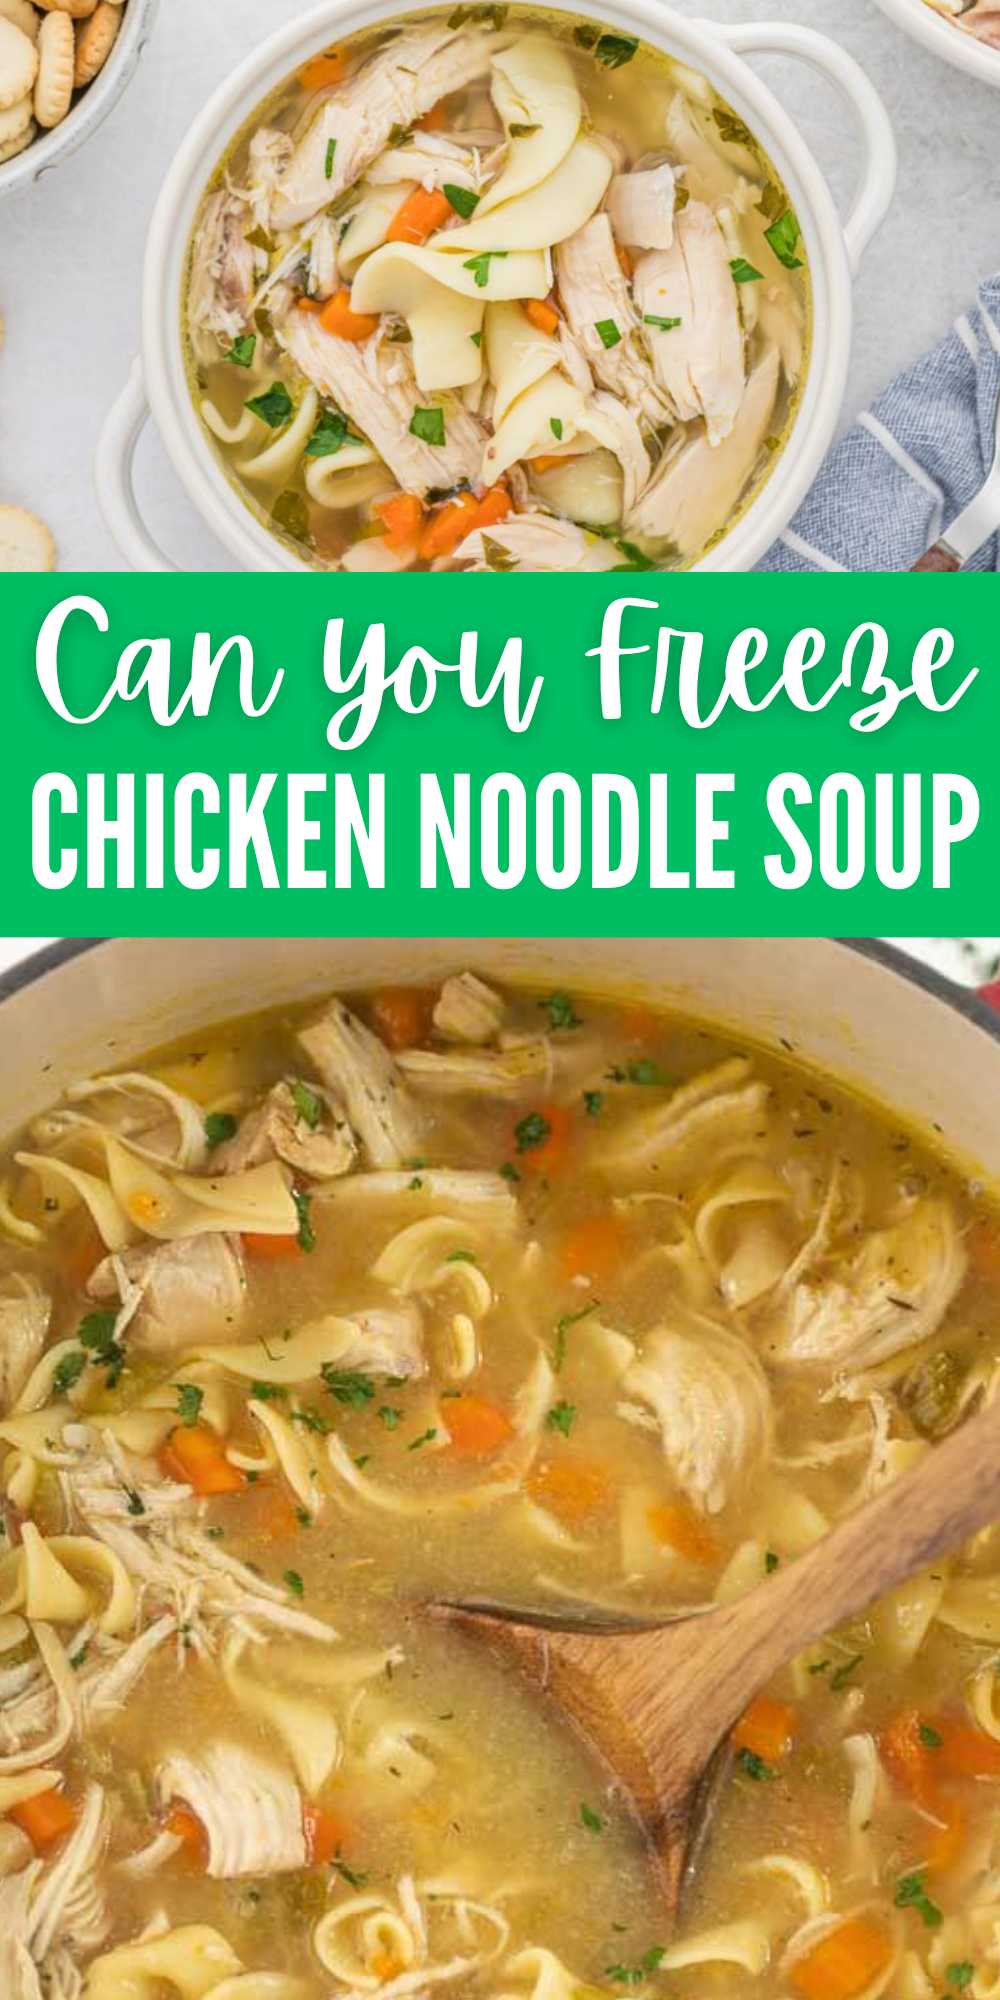 Can You Freeze Chicken Noodle Soup - How to Freeze Soup